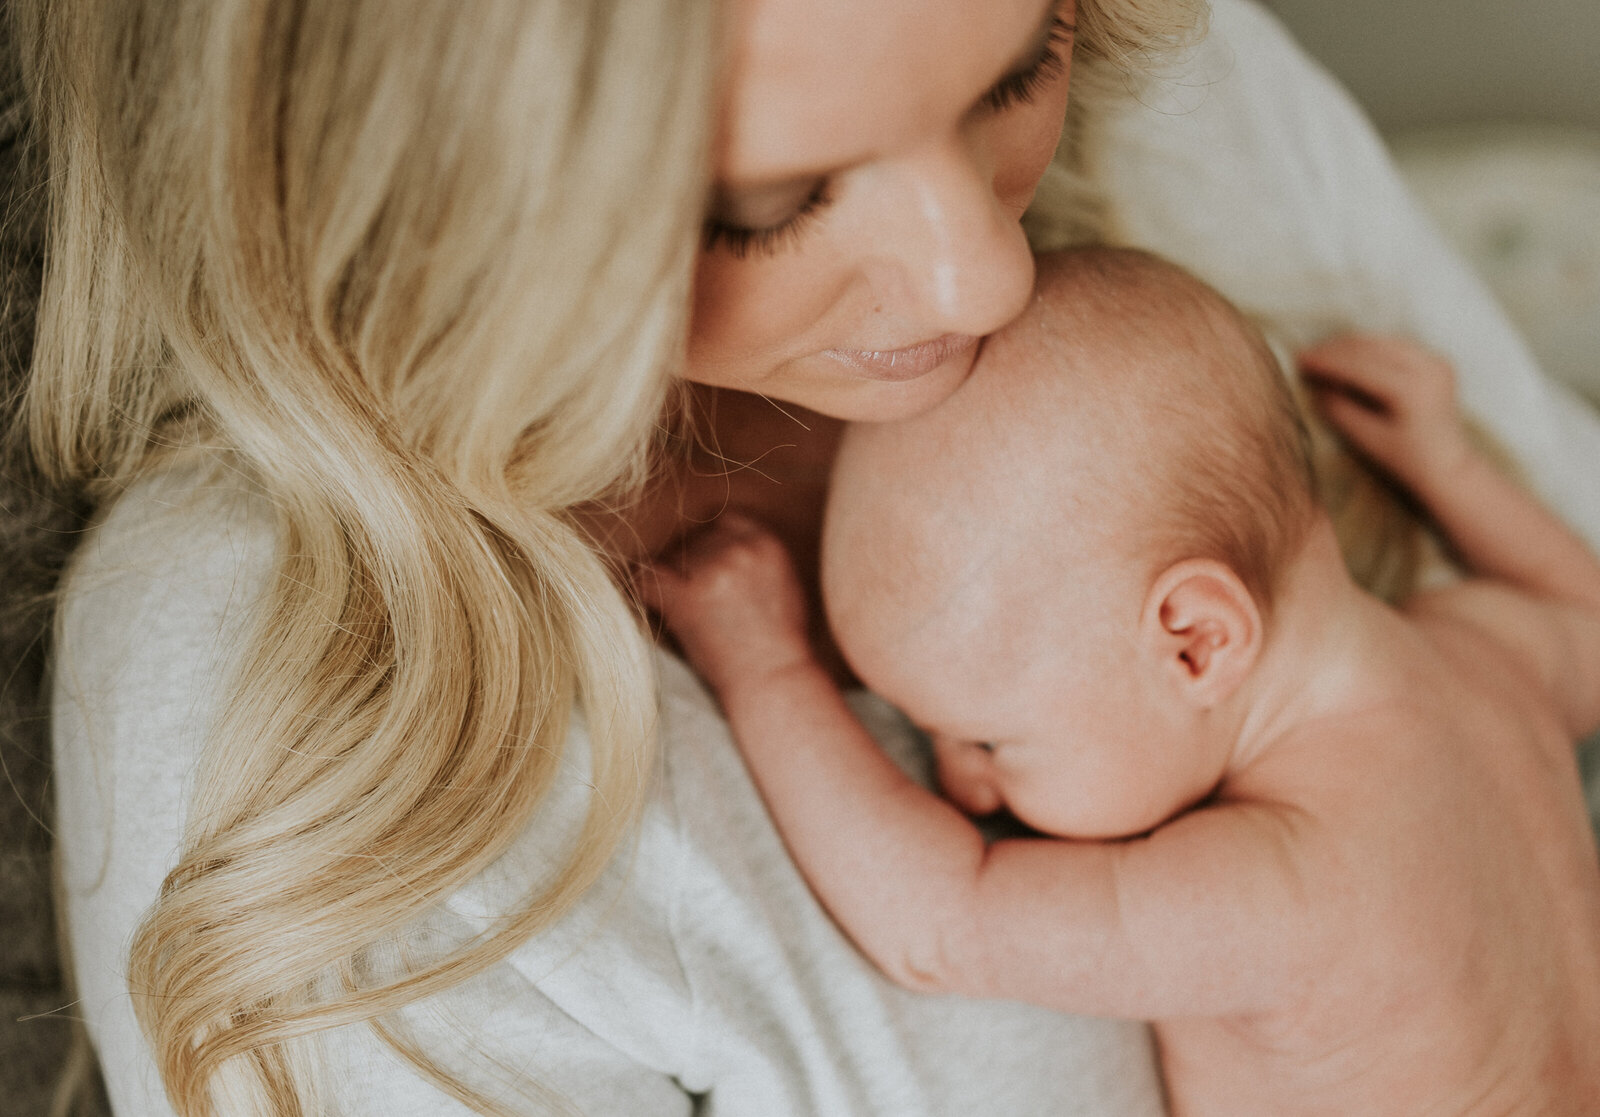 Embrace peace in the Twin Cities with in-home newborn sessions. Shannon Kathleen Photography brings magic to St. Paul or Minneapolis homes. Book your session for moments that last a lifetime